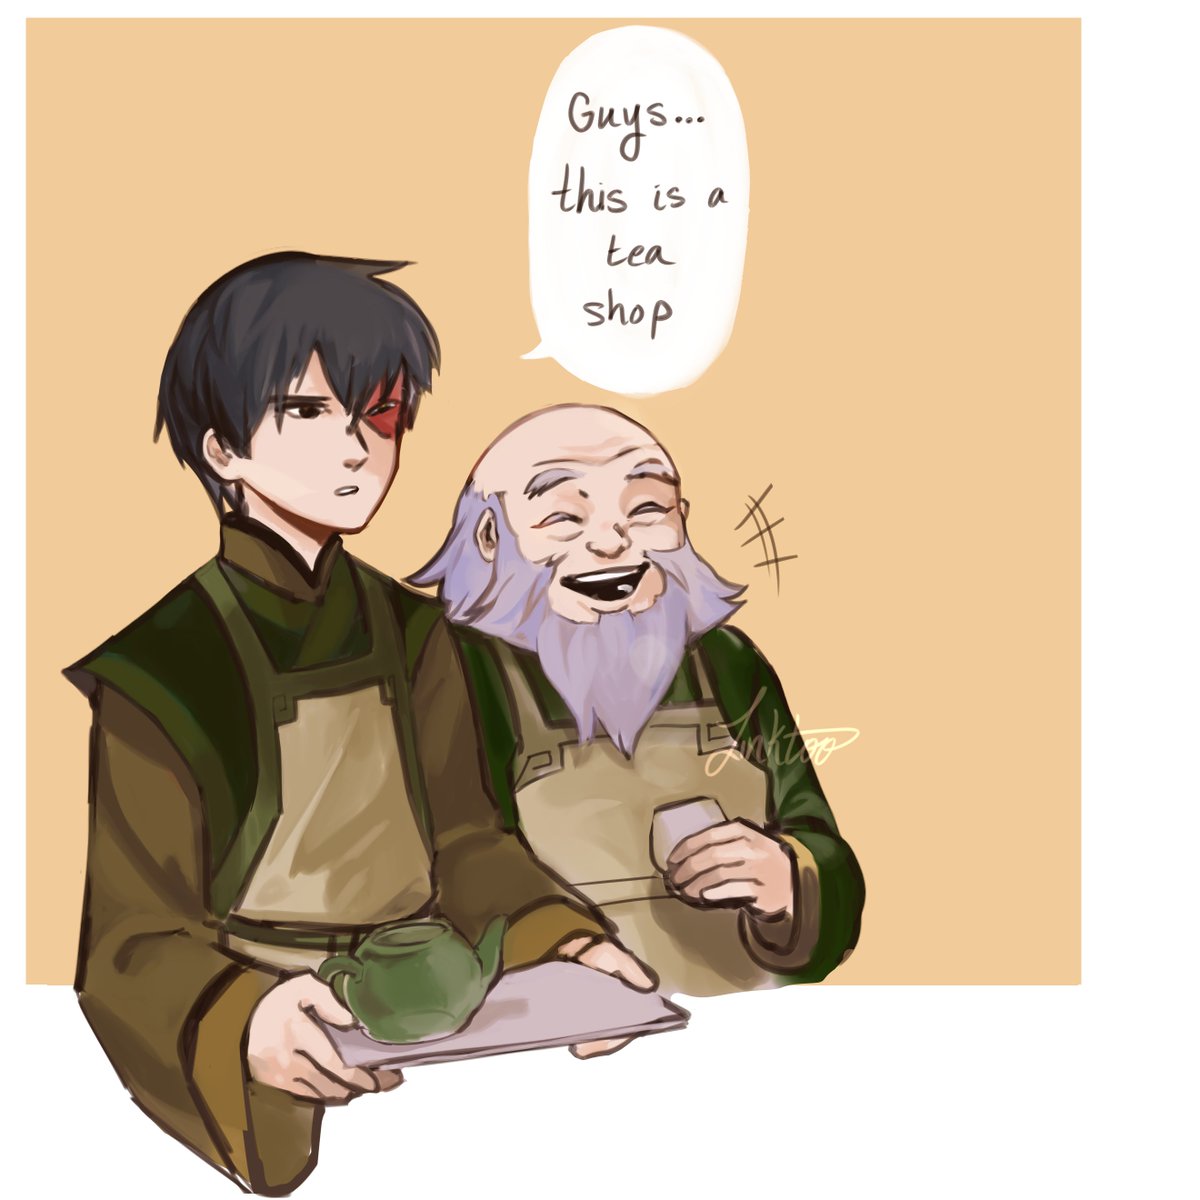 they're trying to advertise for iroh's tea shop
#avatarthelastairbender #atla 